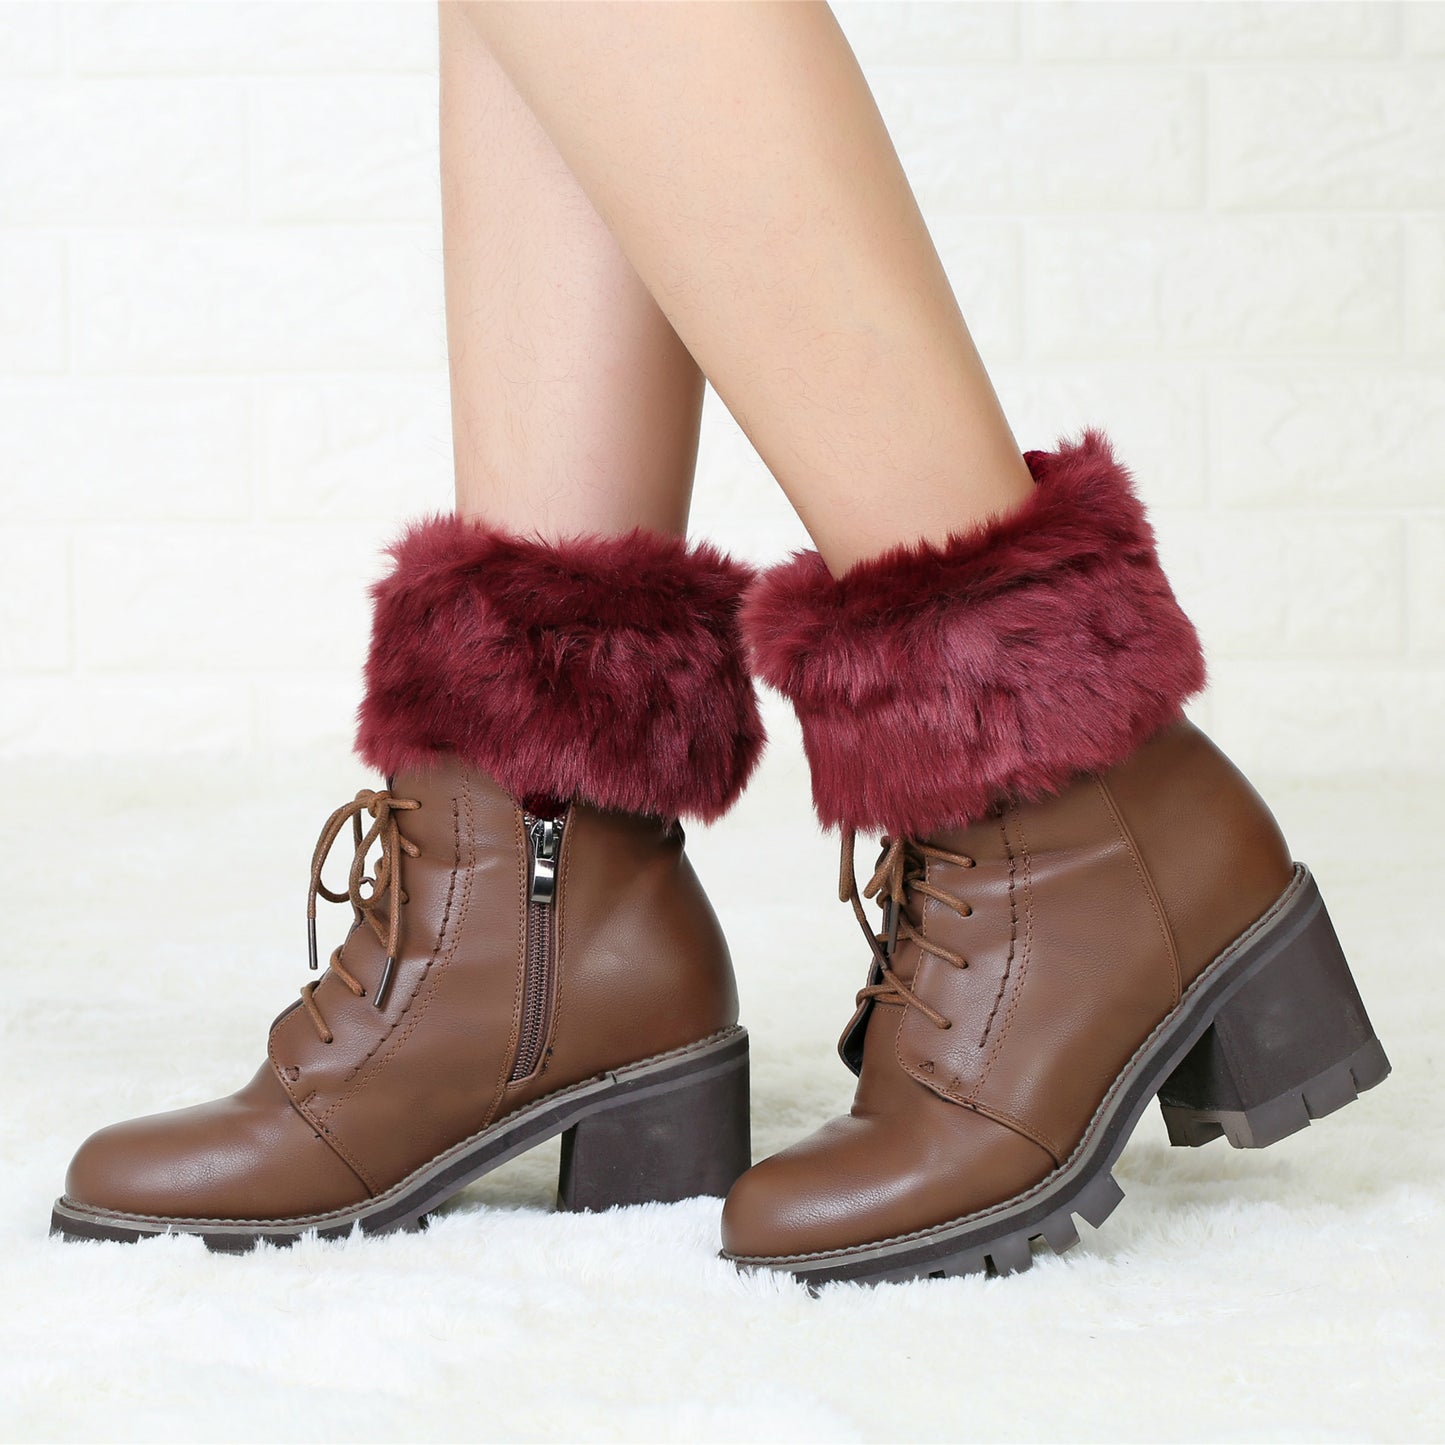 2 Pairs/set Knitted Fur Boot Covers for Women